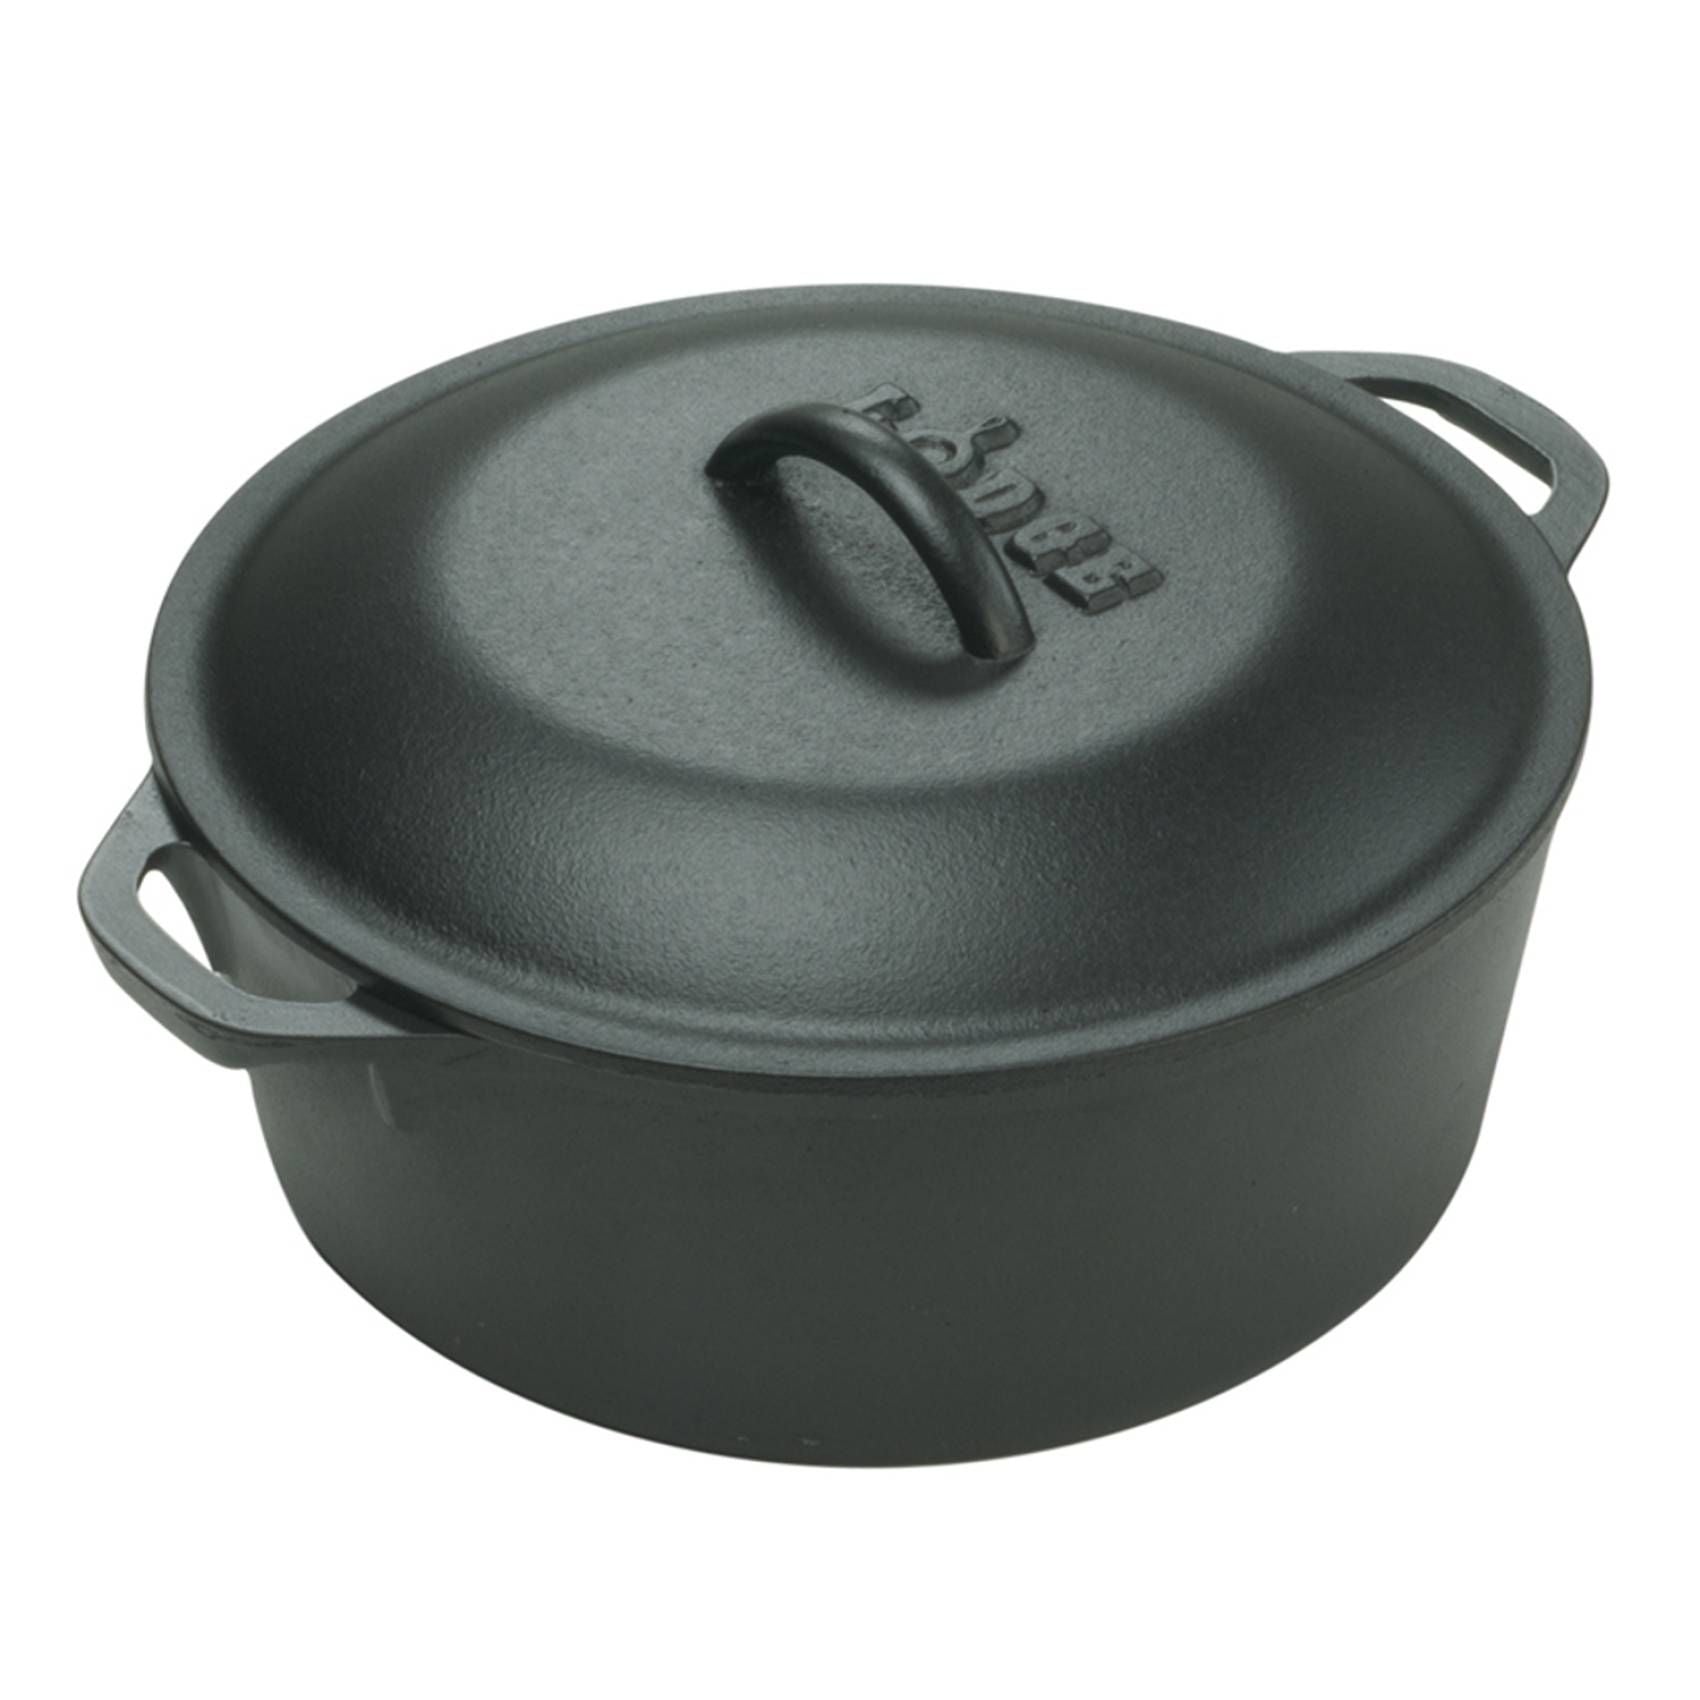 Lodge Cast Iron Dutch Oven with Lid & Loop Handle - 4.7 Litre